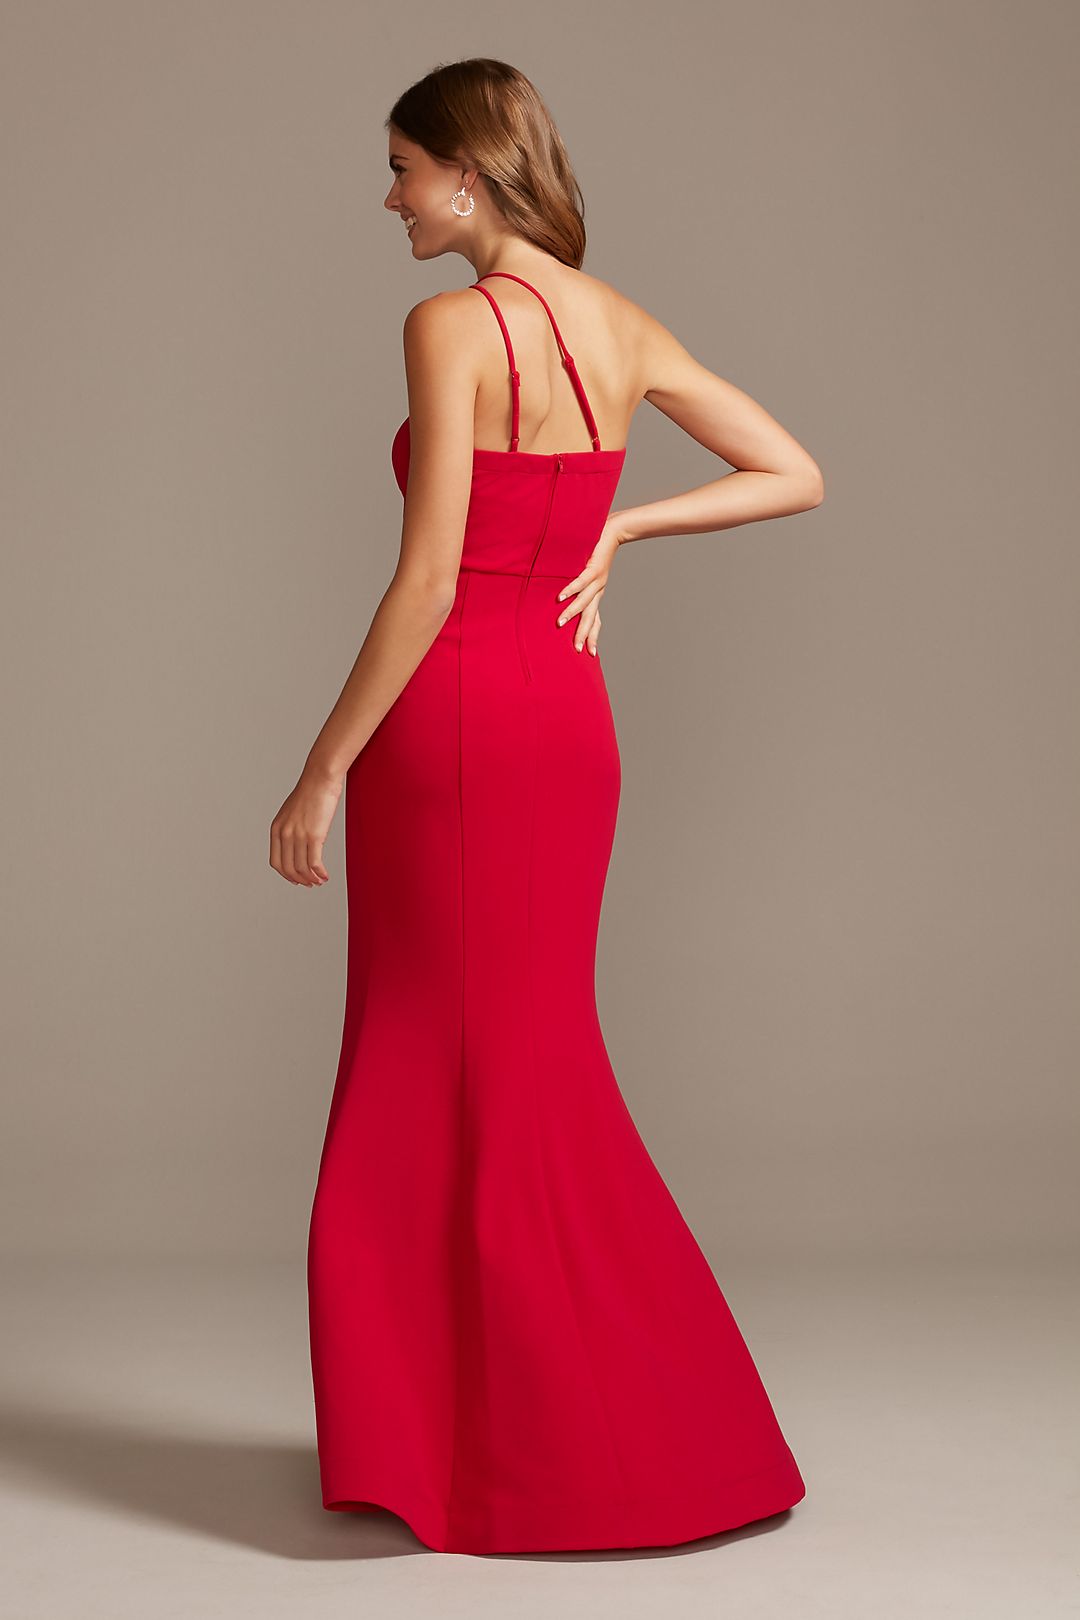 Asymmetric One-Shoulder Strappy Gown with Slit Image 2